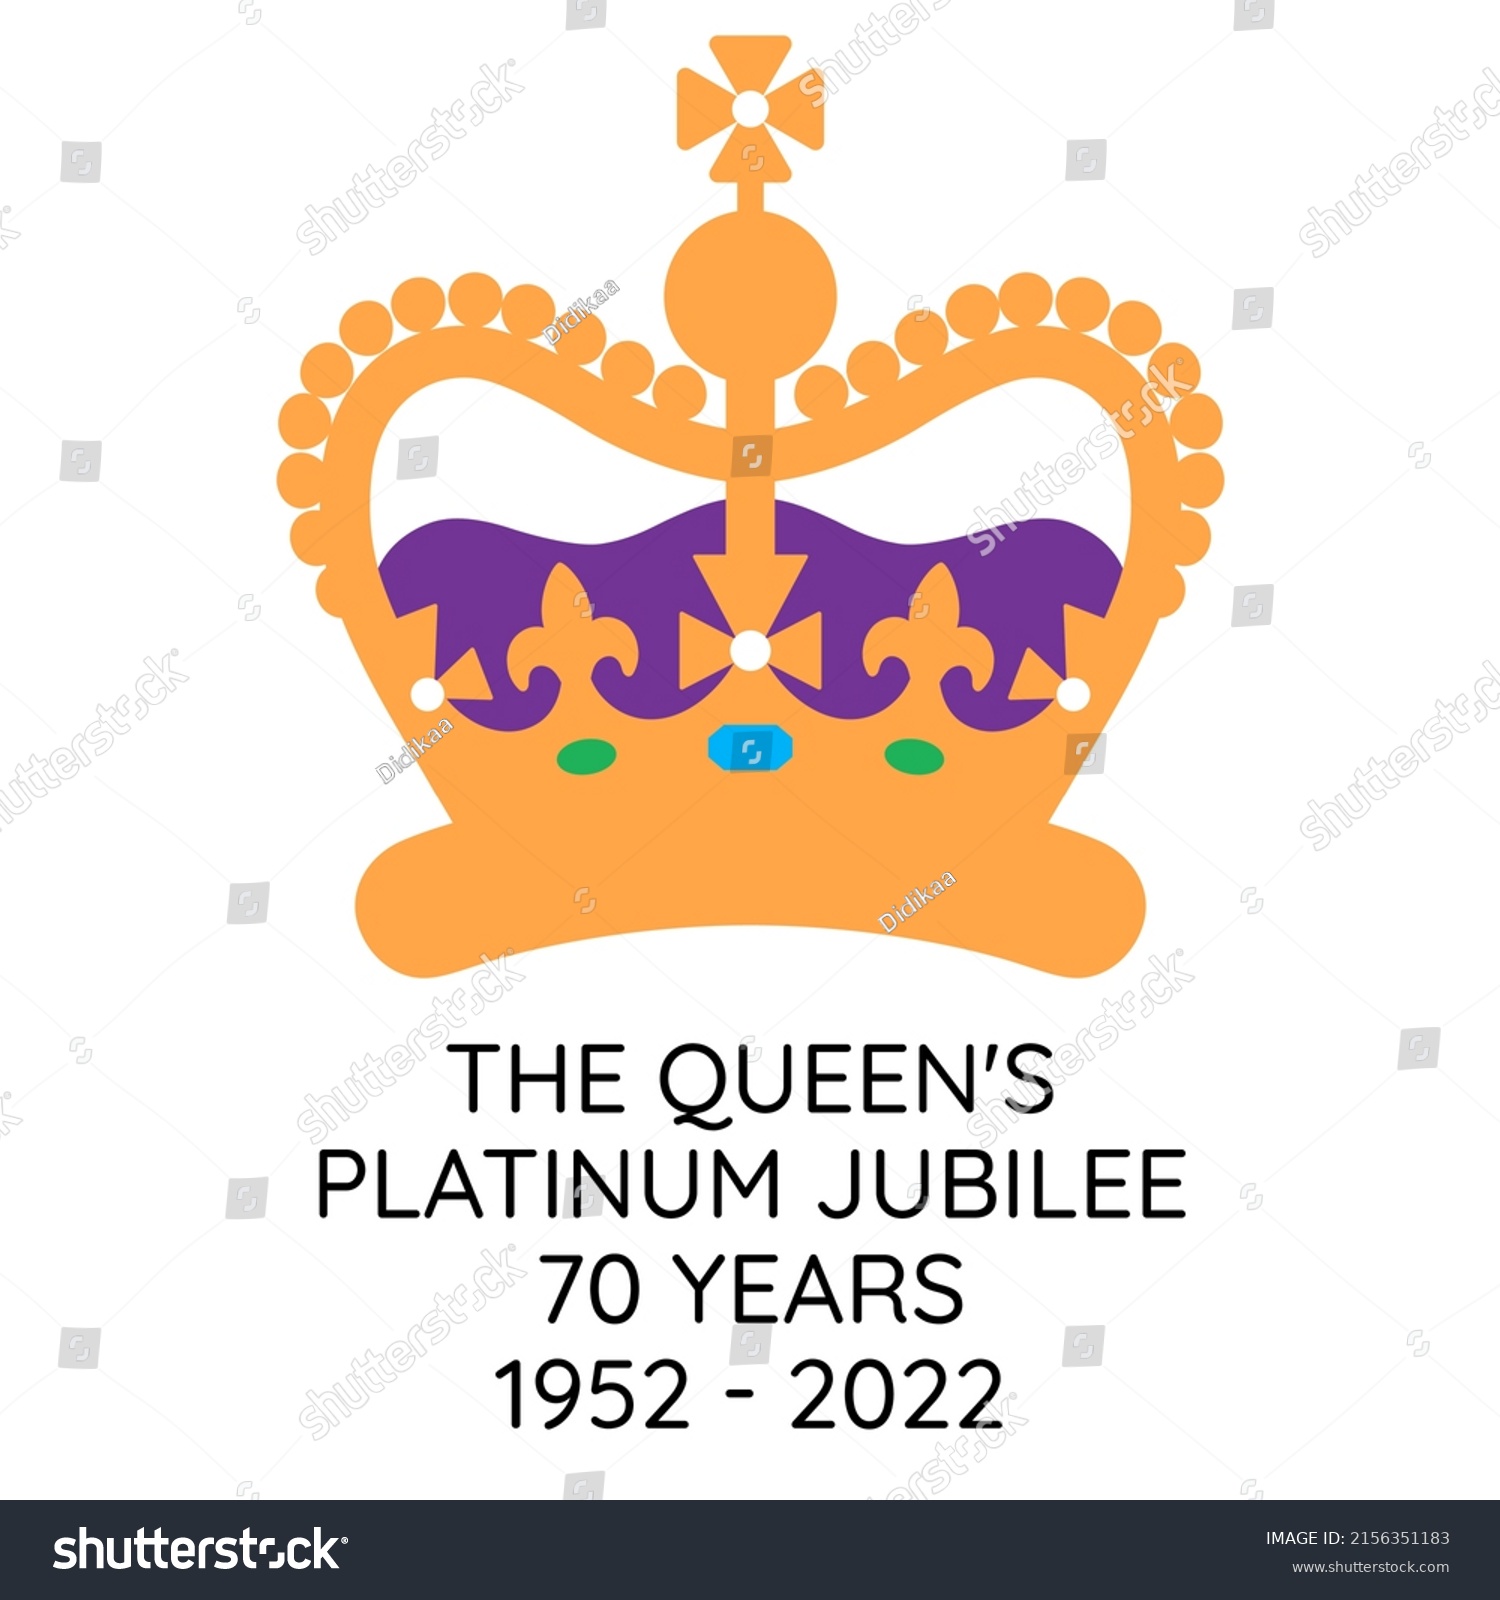 SVG of Banner of The Queen's Platinum Jubilee. 1952-2022. The Queen will become the first British Monarch to celebrate a Platinum Jubilee after 70 years of service.  svg